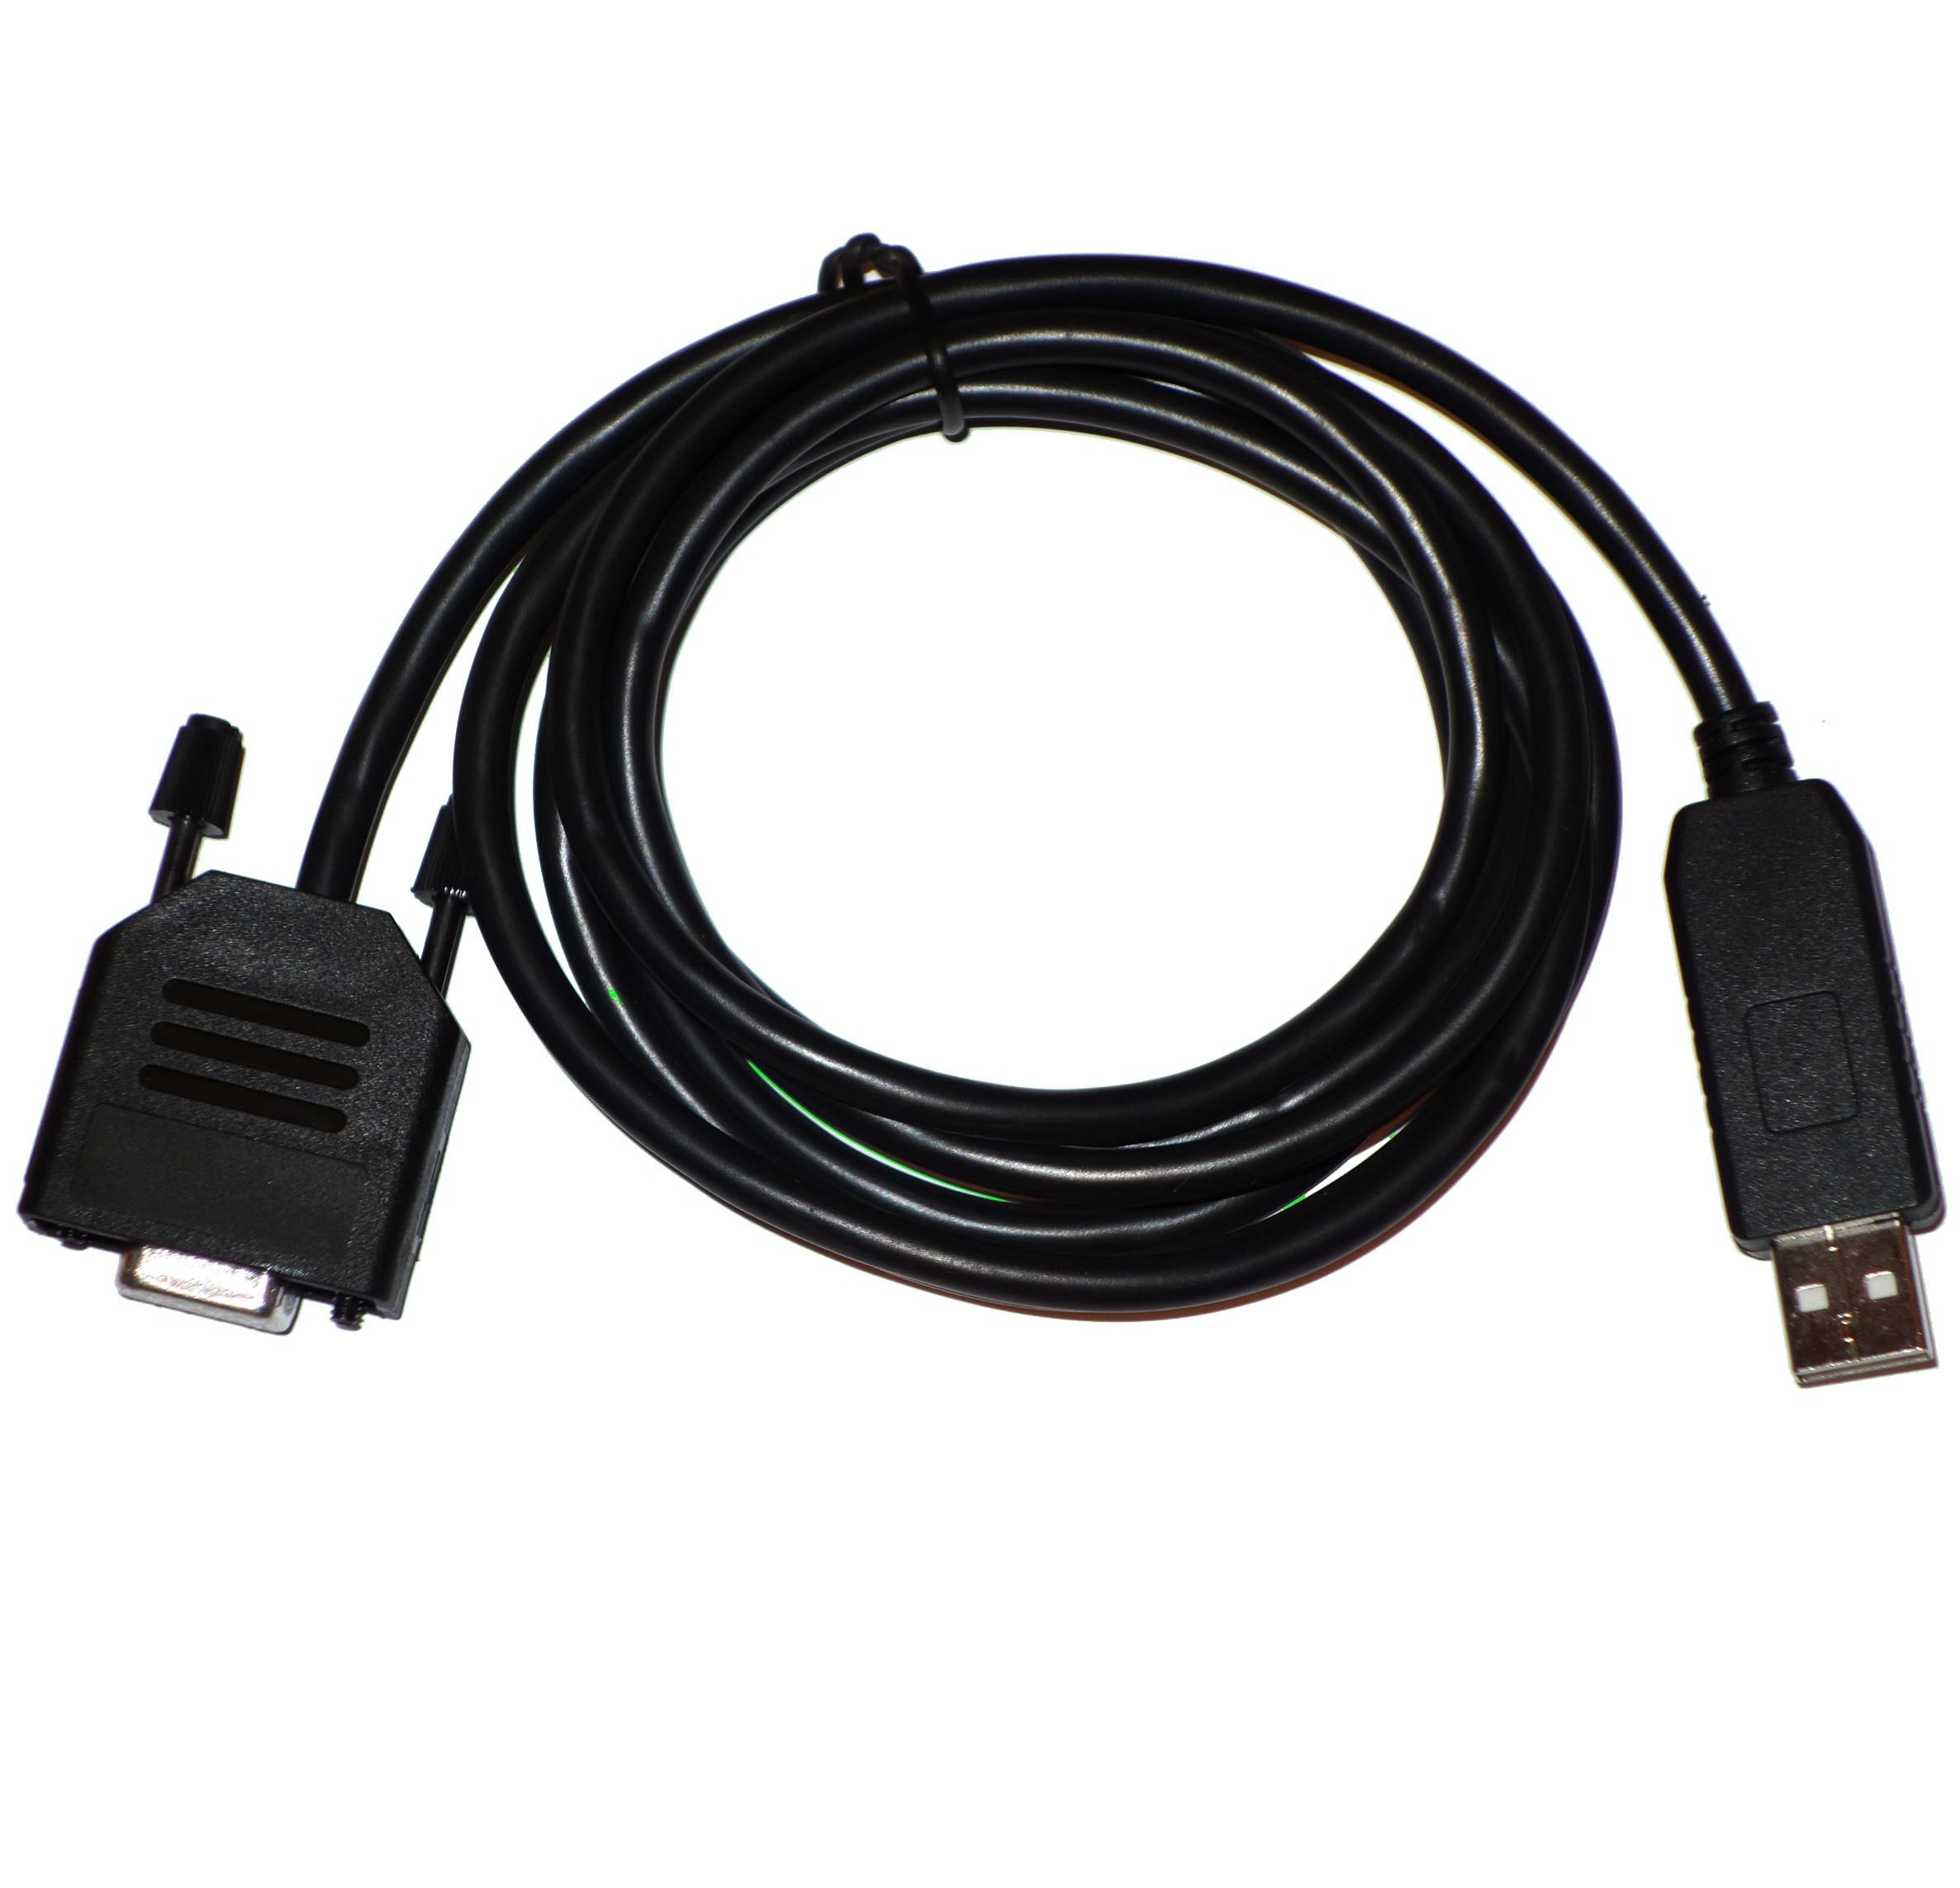 USB CAT interface cable for Yaesu radio FT-747GX FT-767GX FT-1000D FT-990 FT-980 